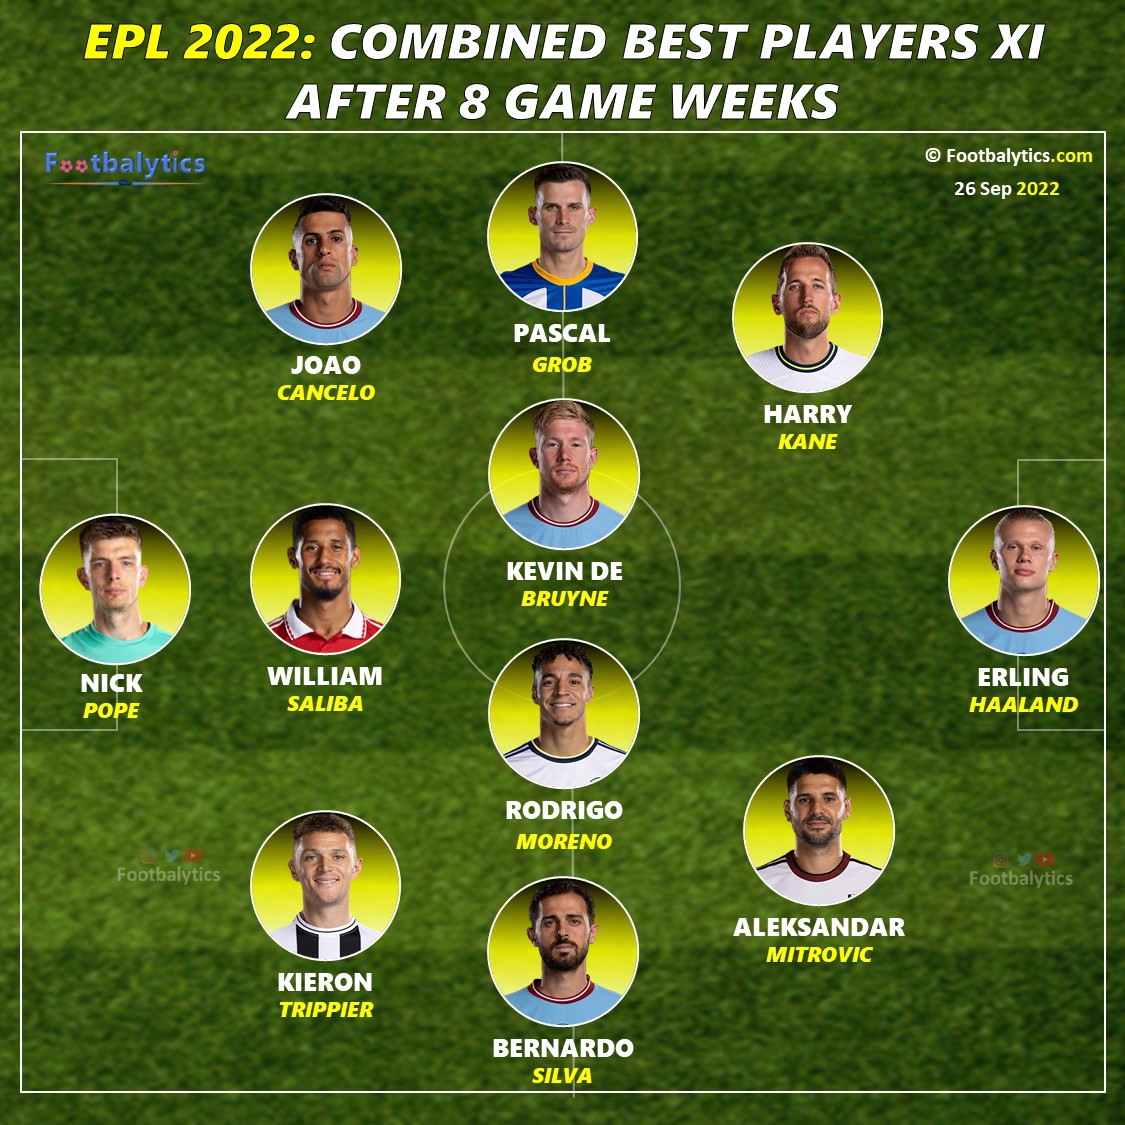 epl 2022 combined best players 11 after 8 gameweeks footbalytics